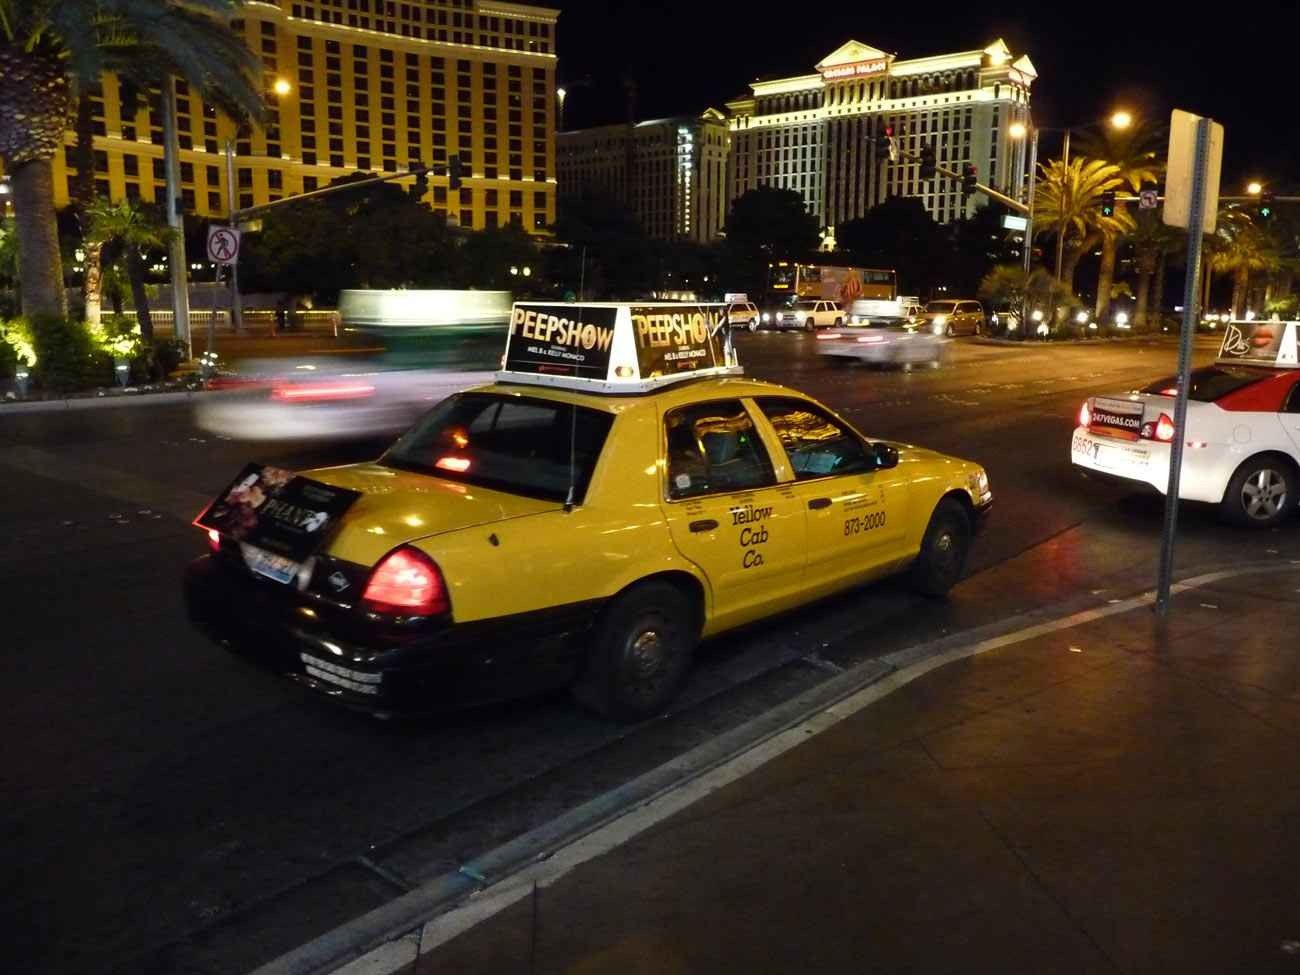 1581237060 160 Transportation in Las Vegas ... All you need to know - Transportation in Las Vegas ... All you need to know about transportation